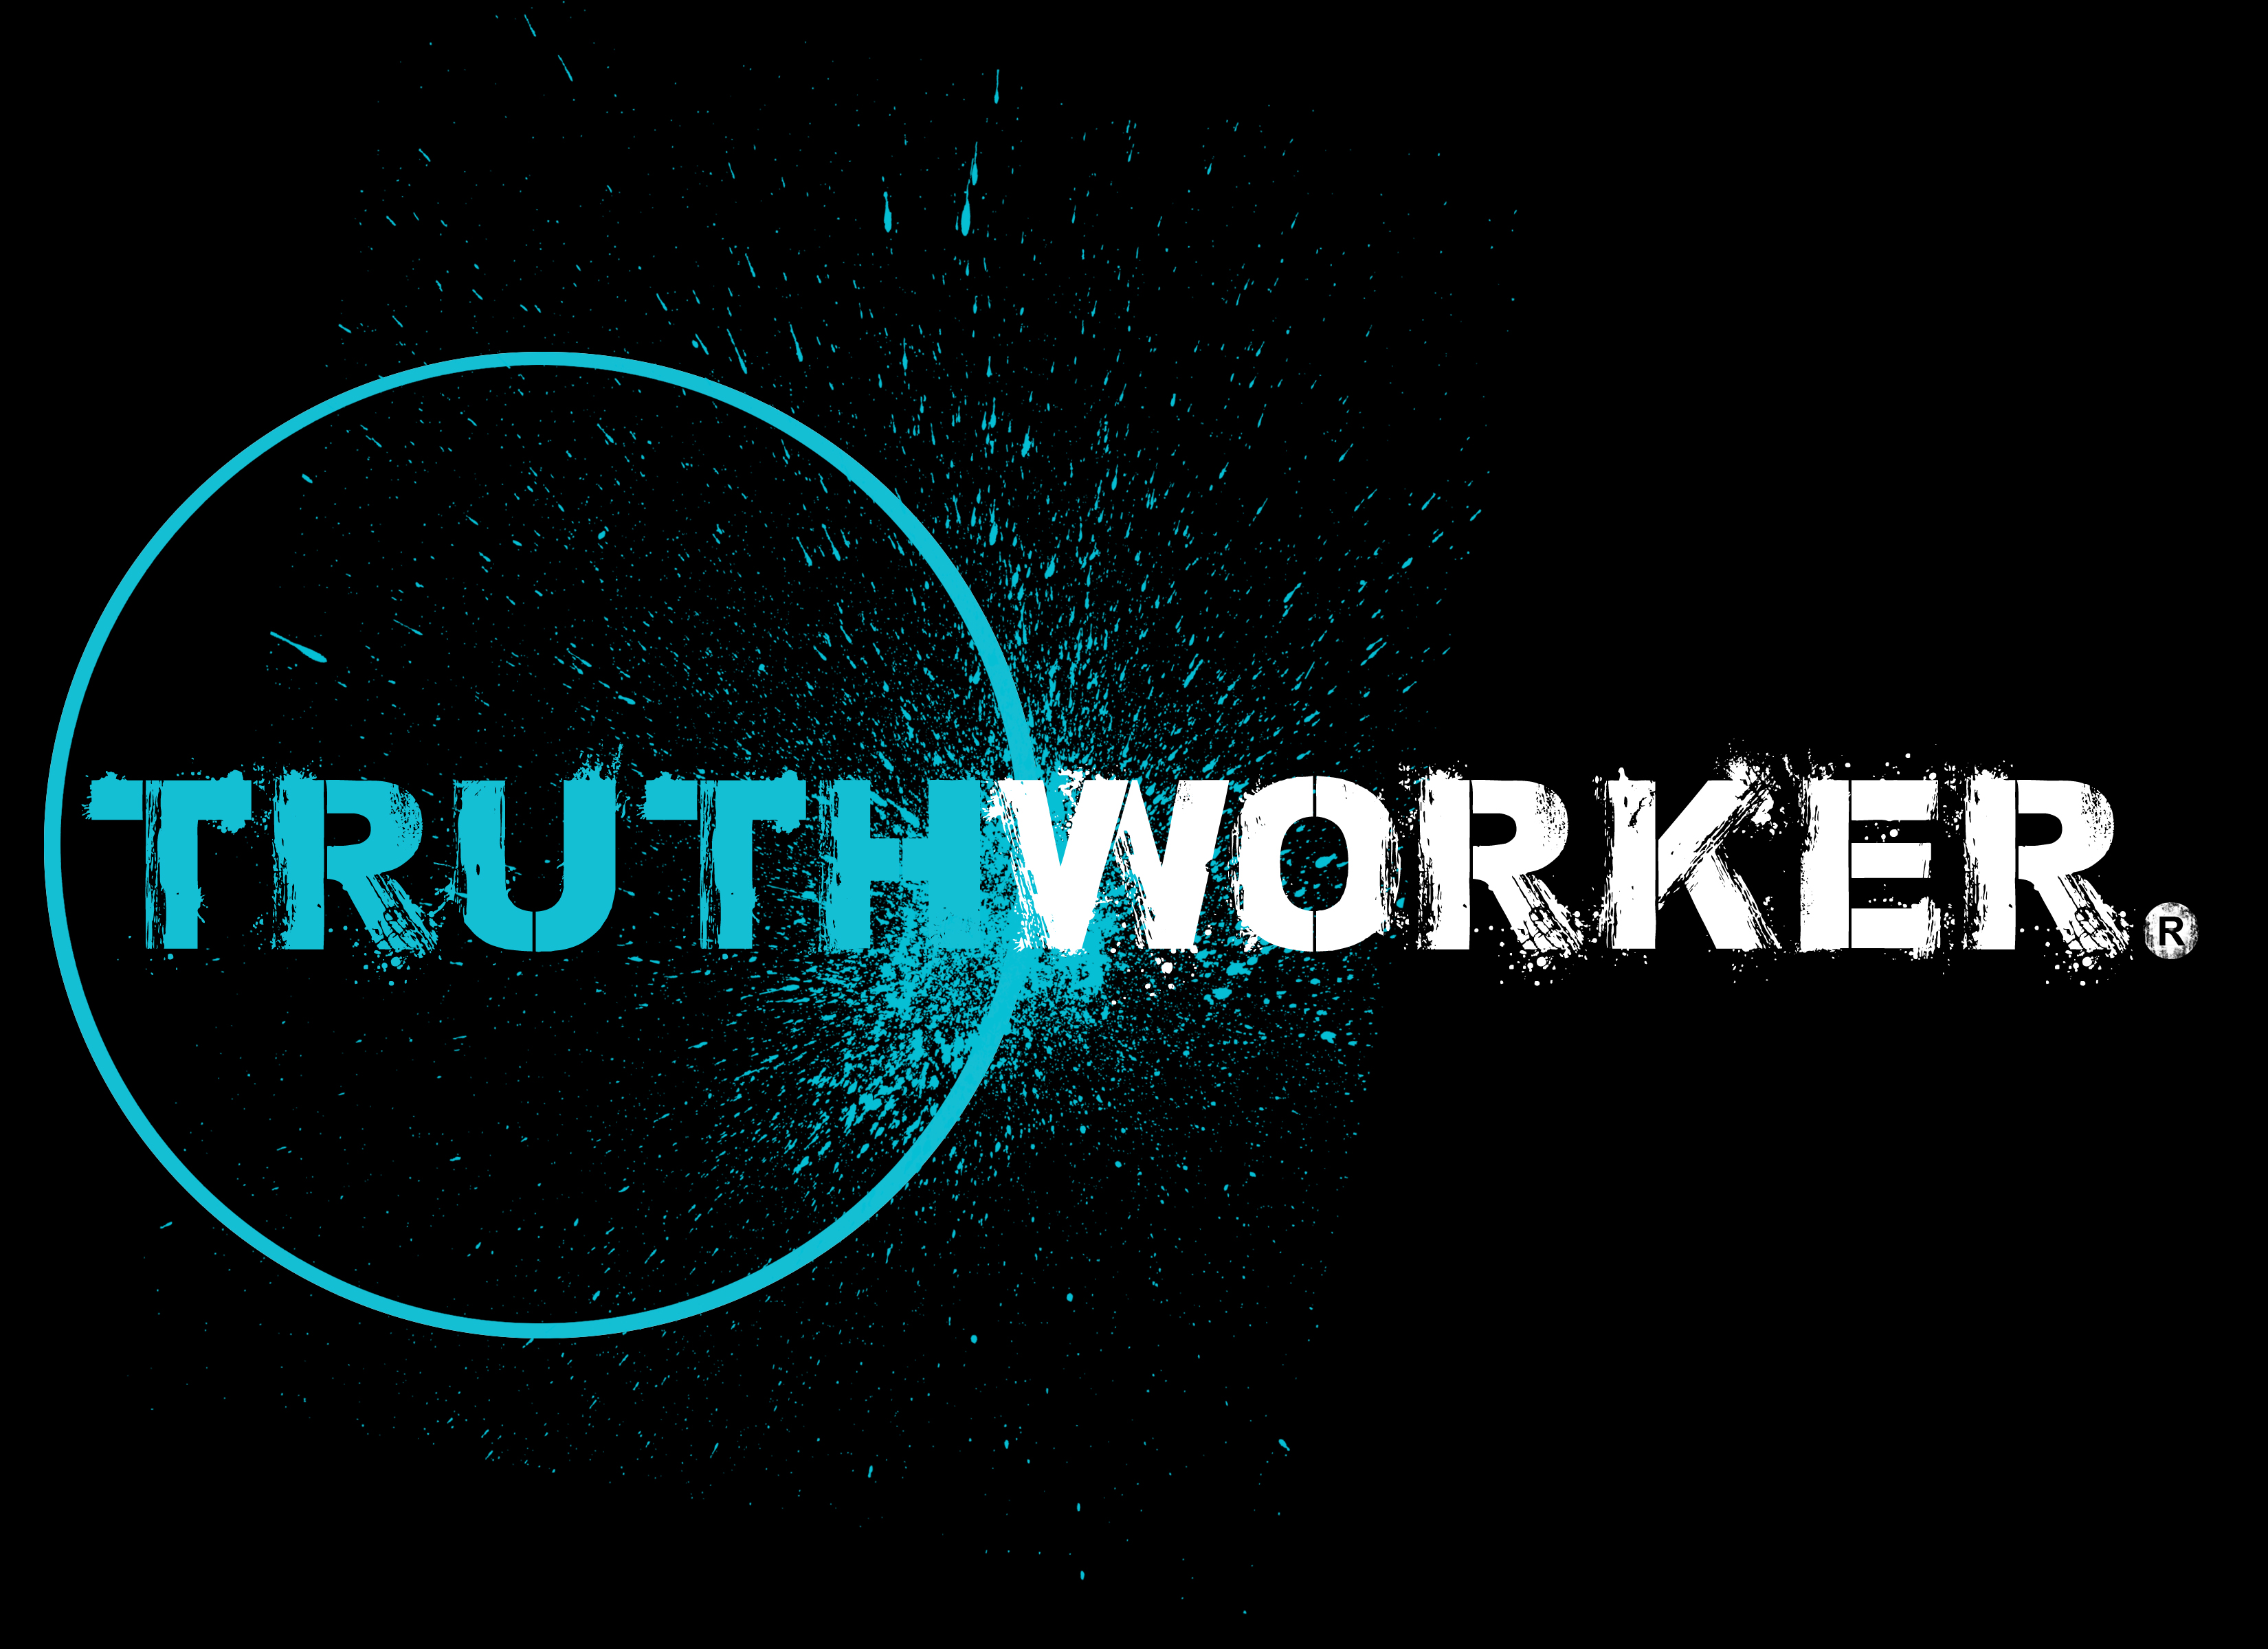 truthworker WEB logo with turquoise & white